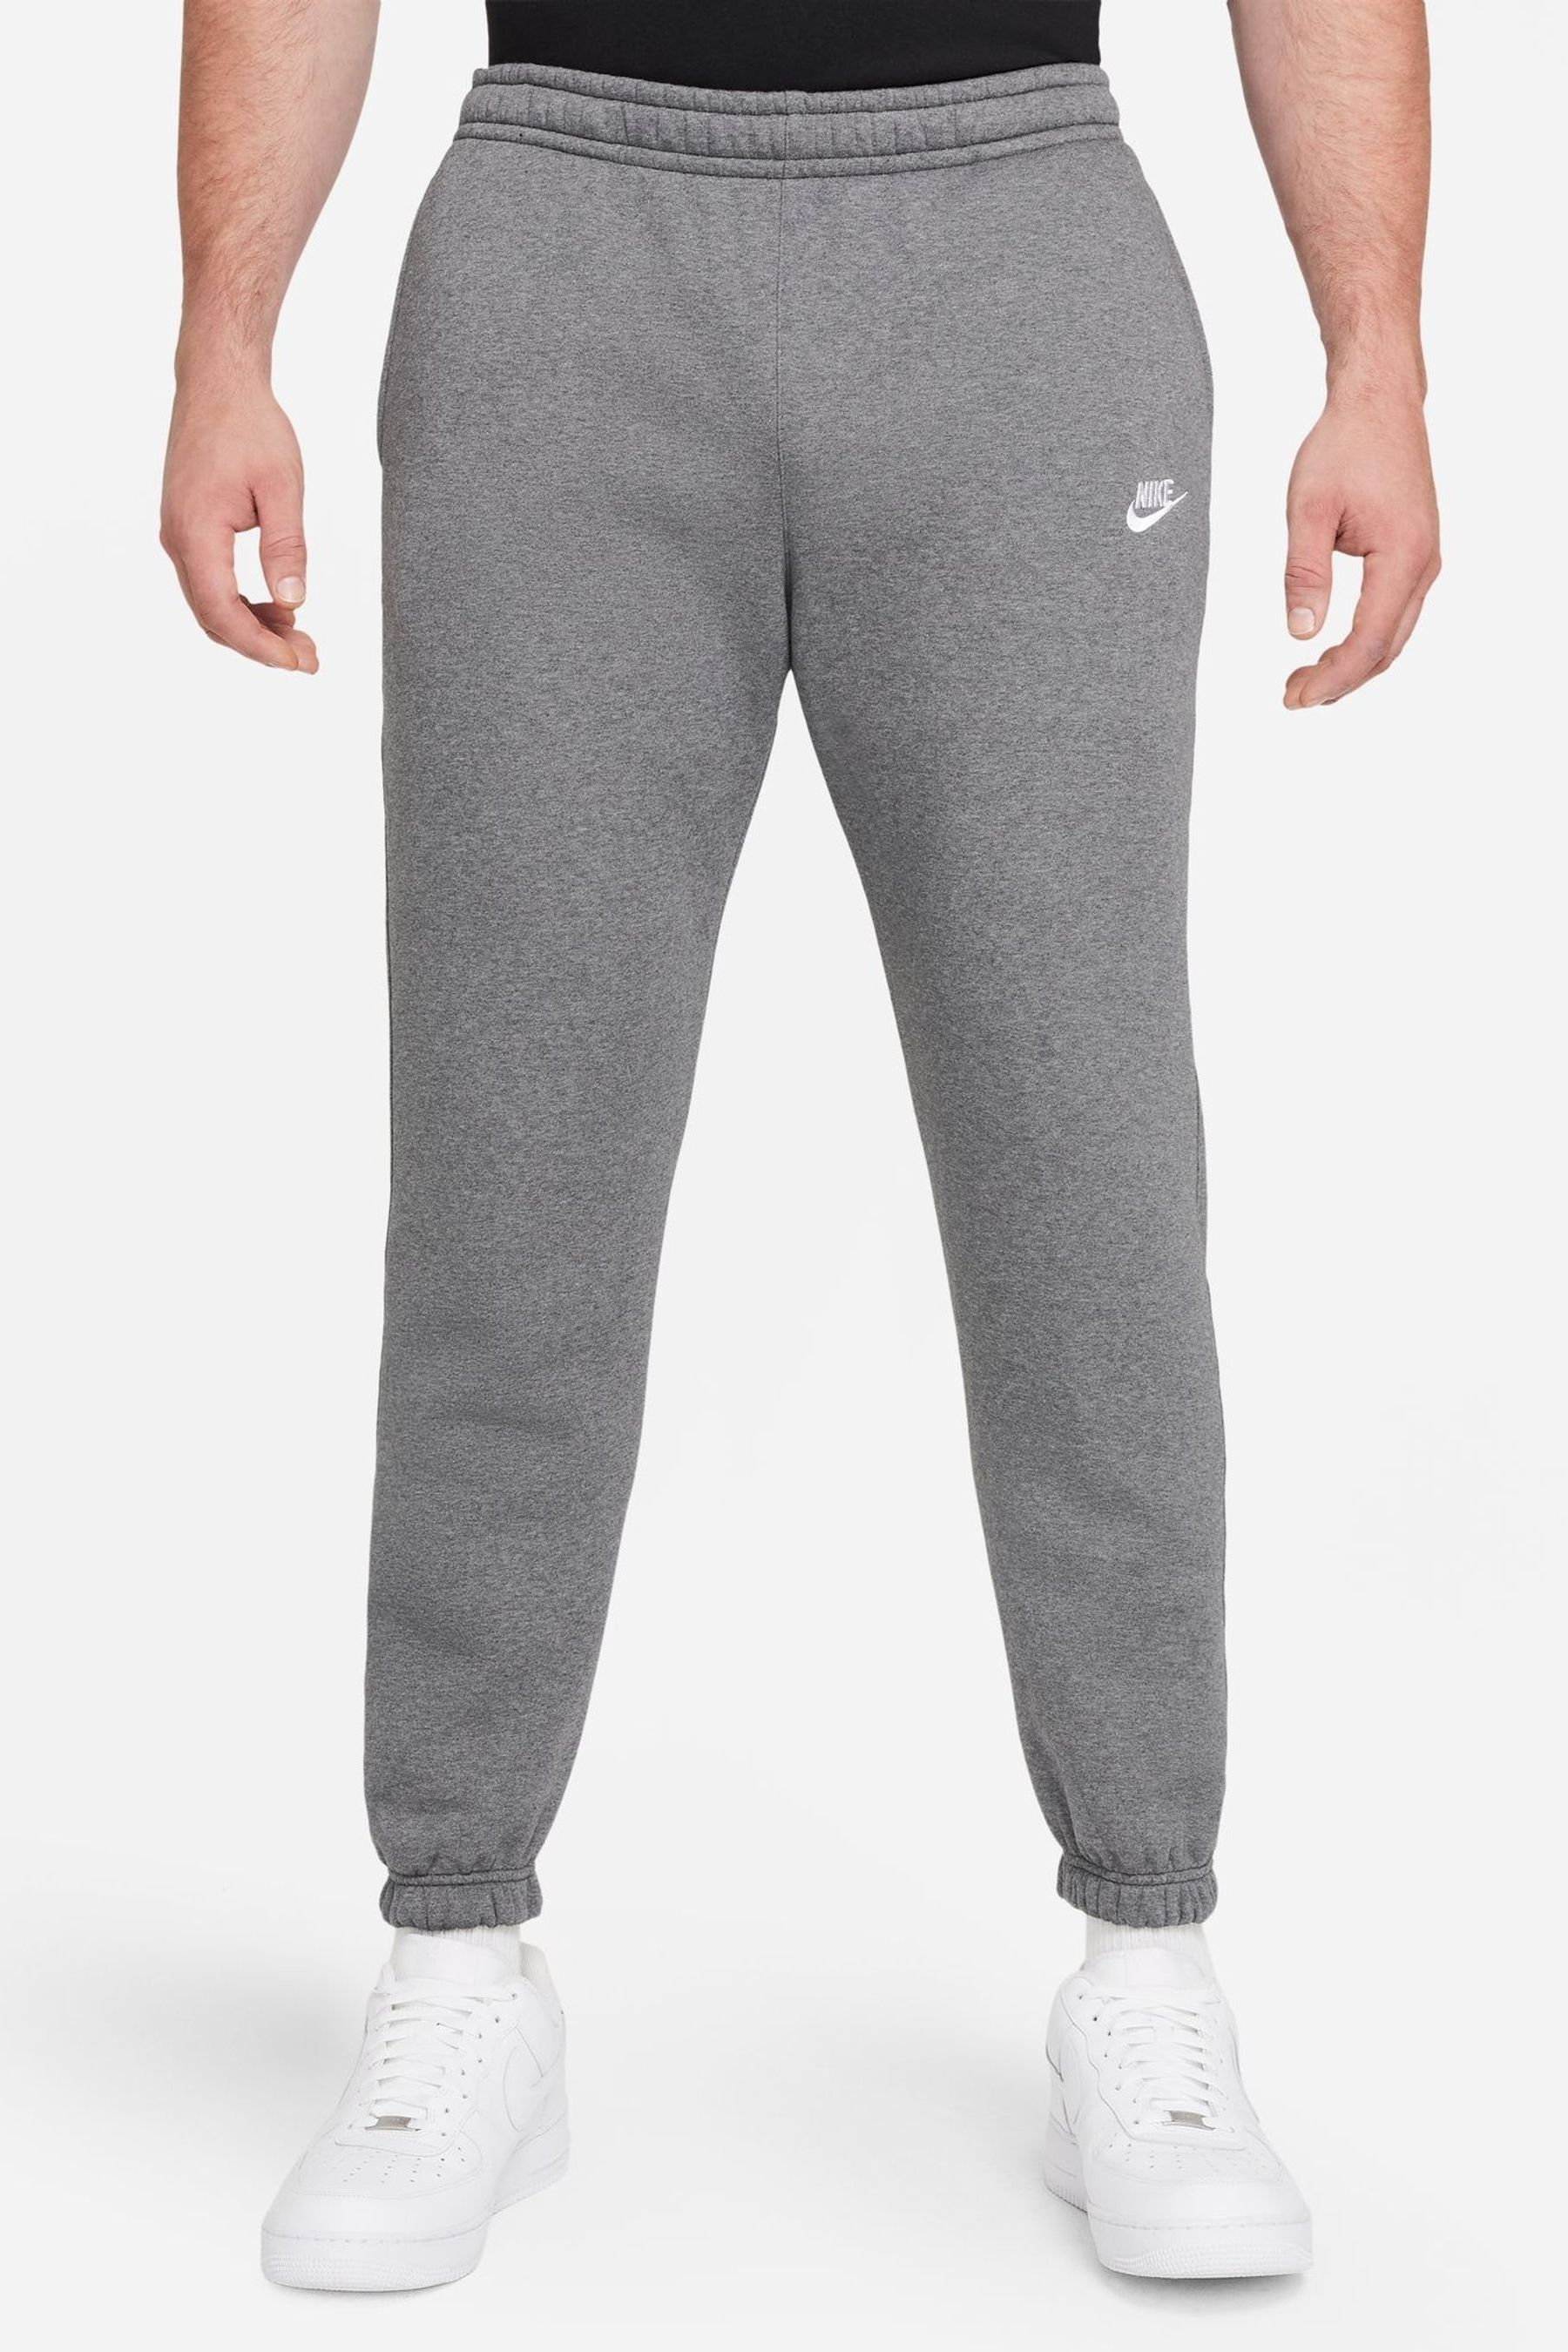 Buy Nike Charcoal Grey Club Cuffed Joggers from the Next UK online shop